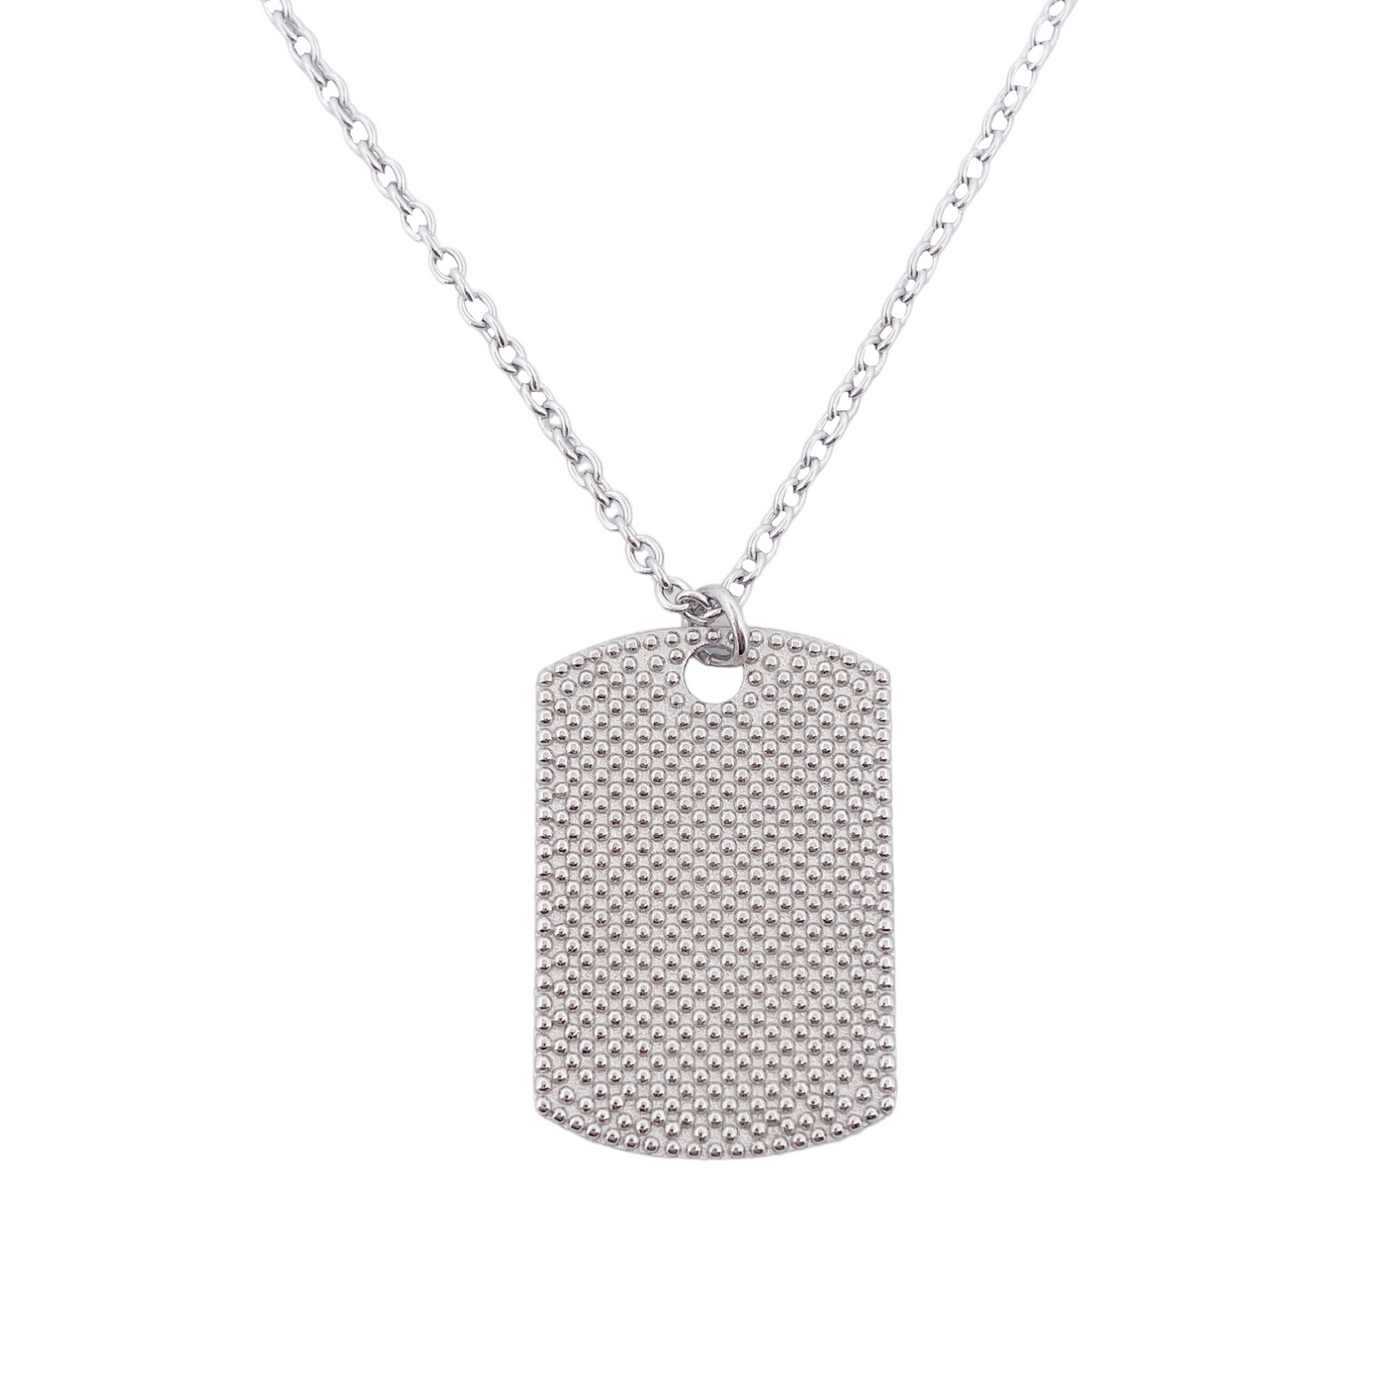 SILVER NECKLACE WITH RECTANGULAR PENDANT